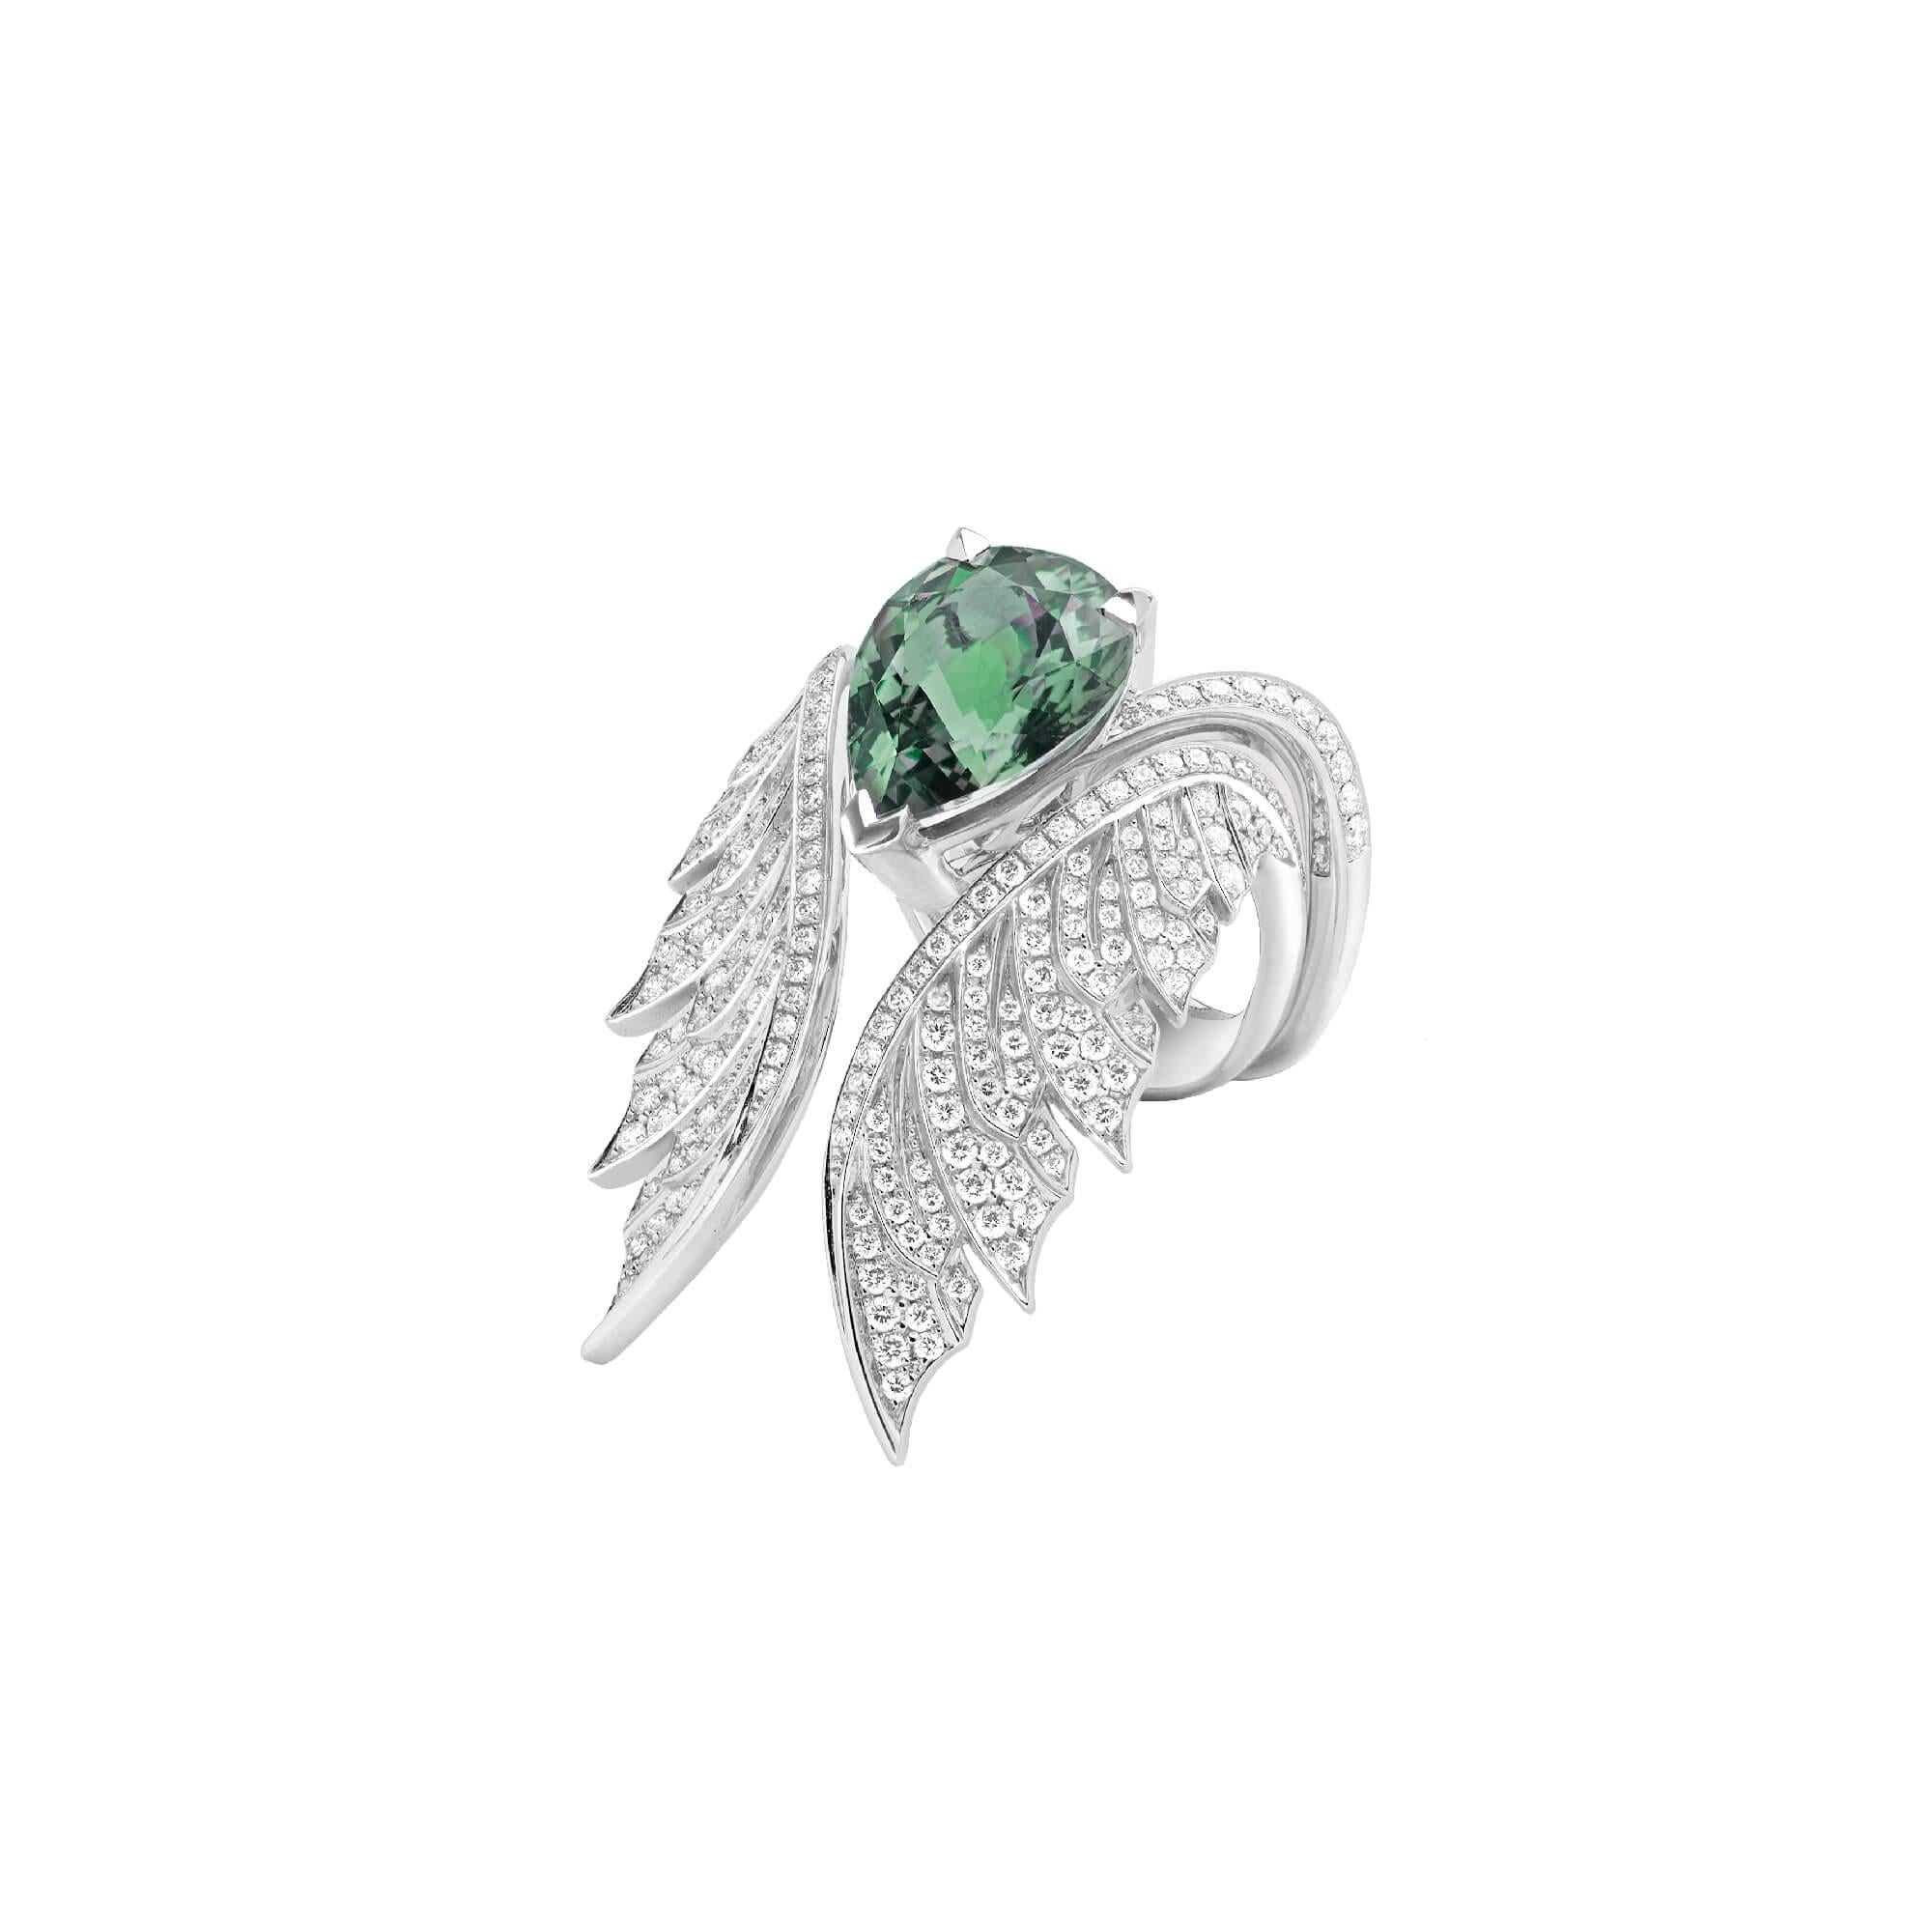 18ct white gold cocktail ring with white diamond pavé (0.19ct) and a centre pear-shaped green tourmaline (3.65ct). The Pavé Cocktail Ring can be worn as an inner to the Magnipheasant Open Feather Ring, available in white gold.

Please enquire for